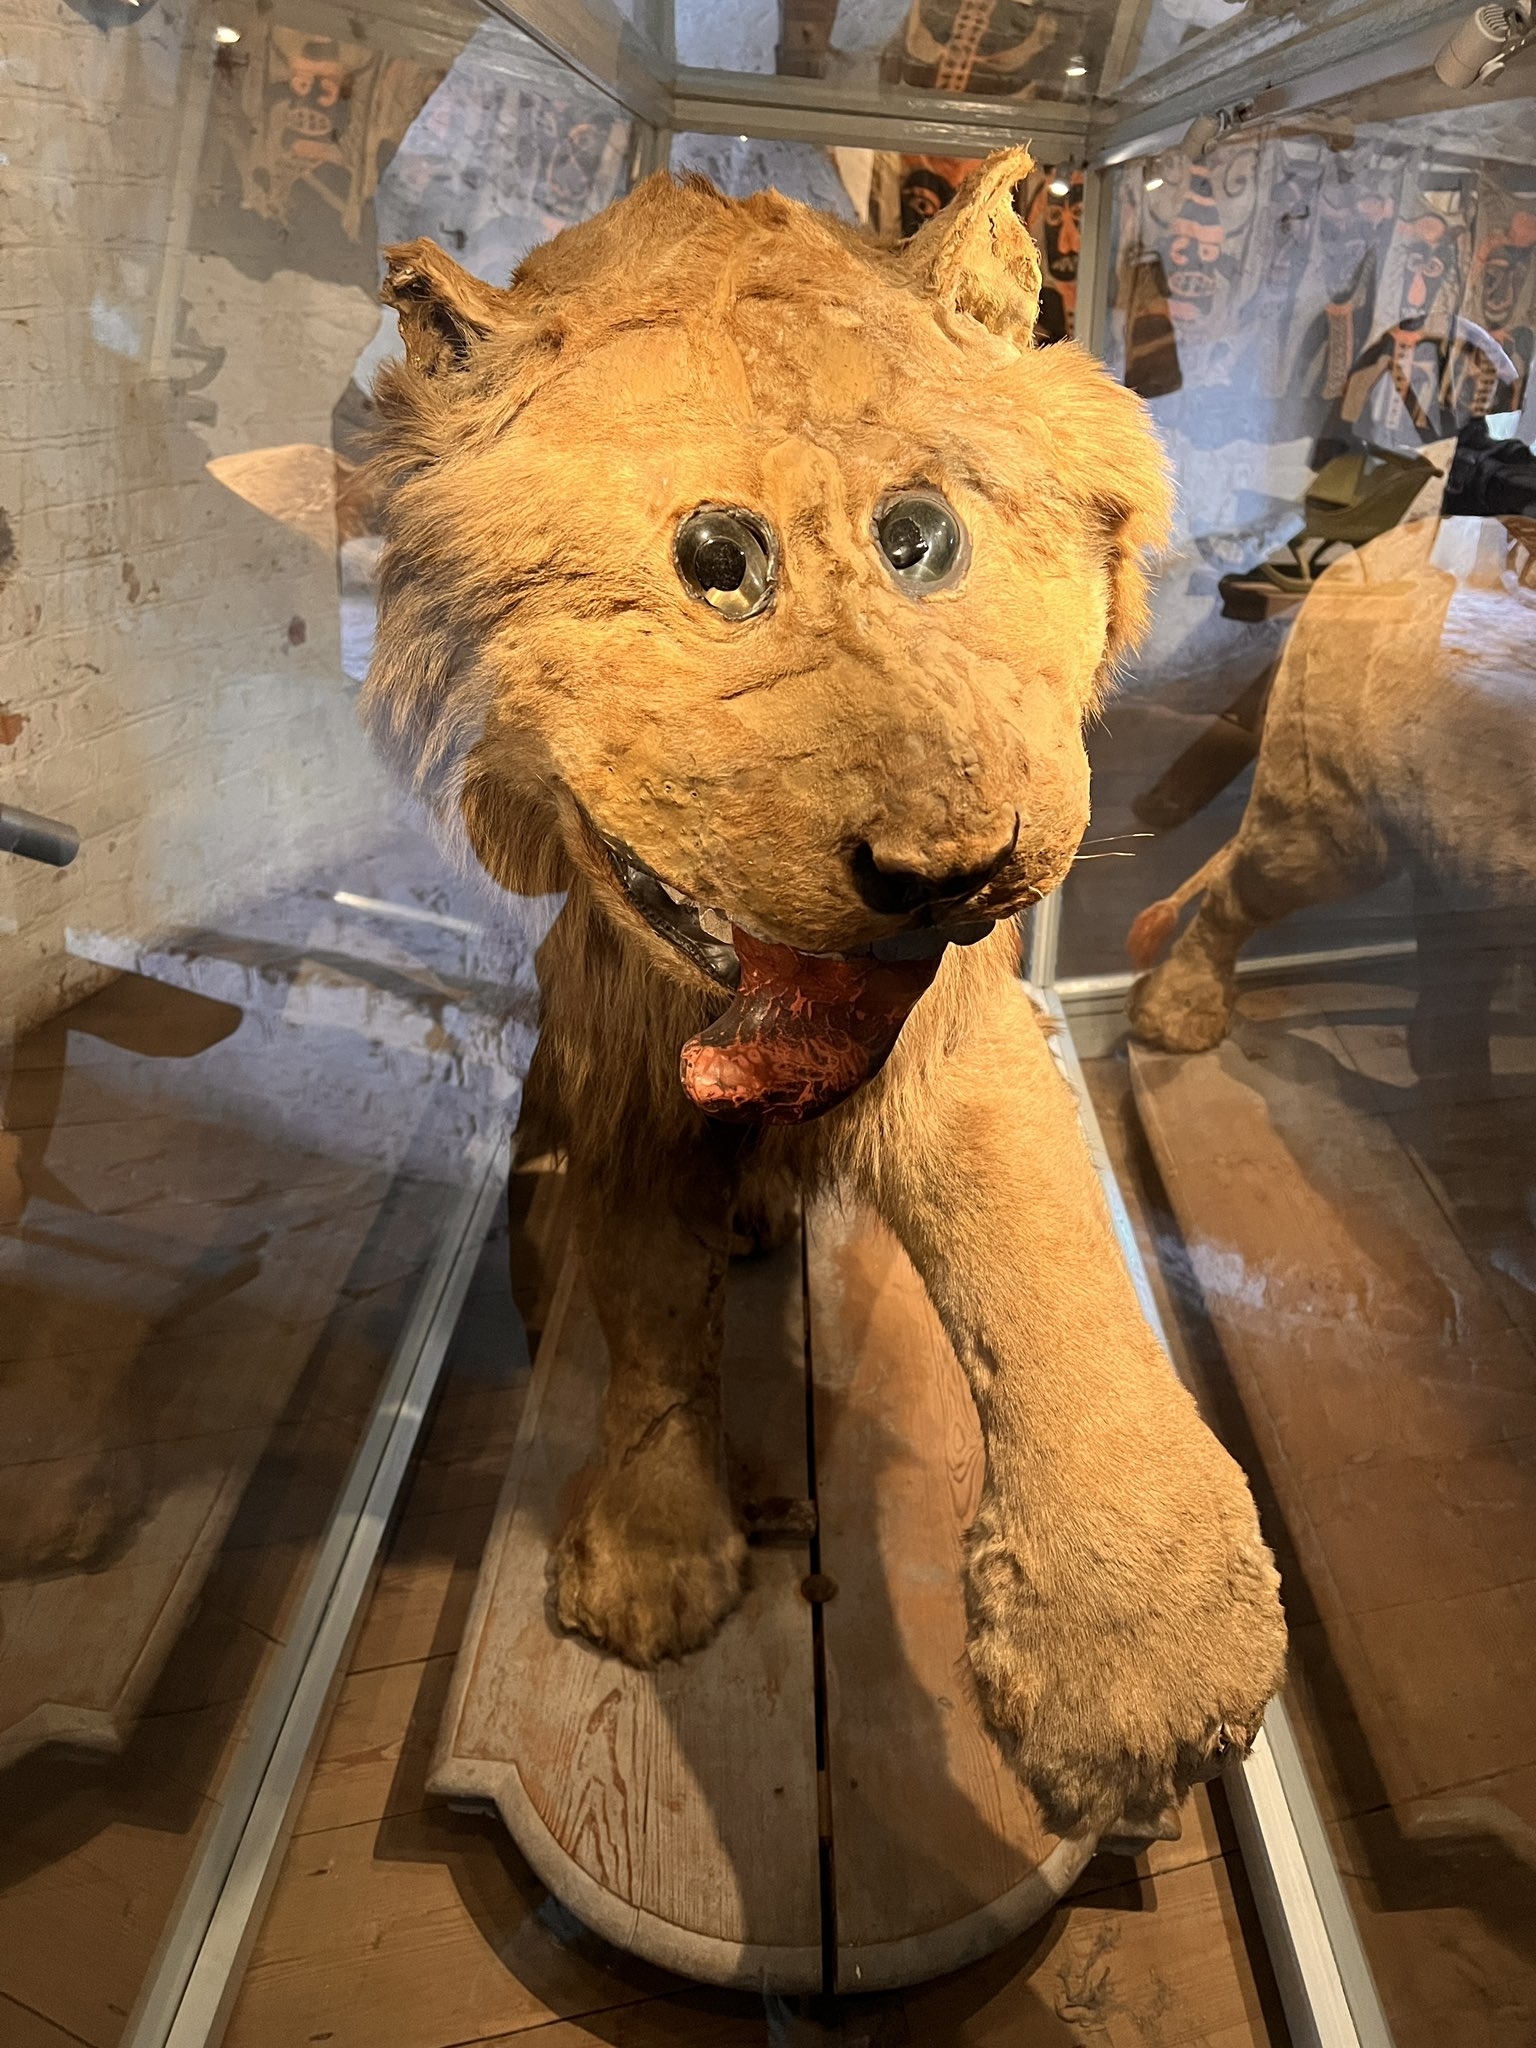 A taxidermy &quot;lion&quot; that looks nothing like a lion, with small ears, its tongue out, glass eyes very close together, and a raised paw